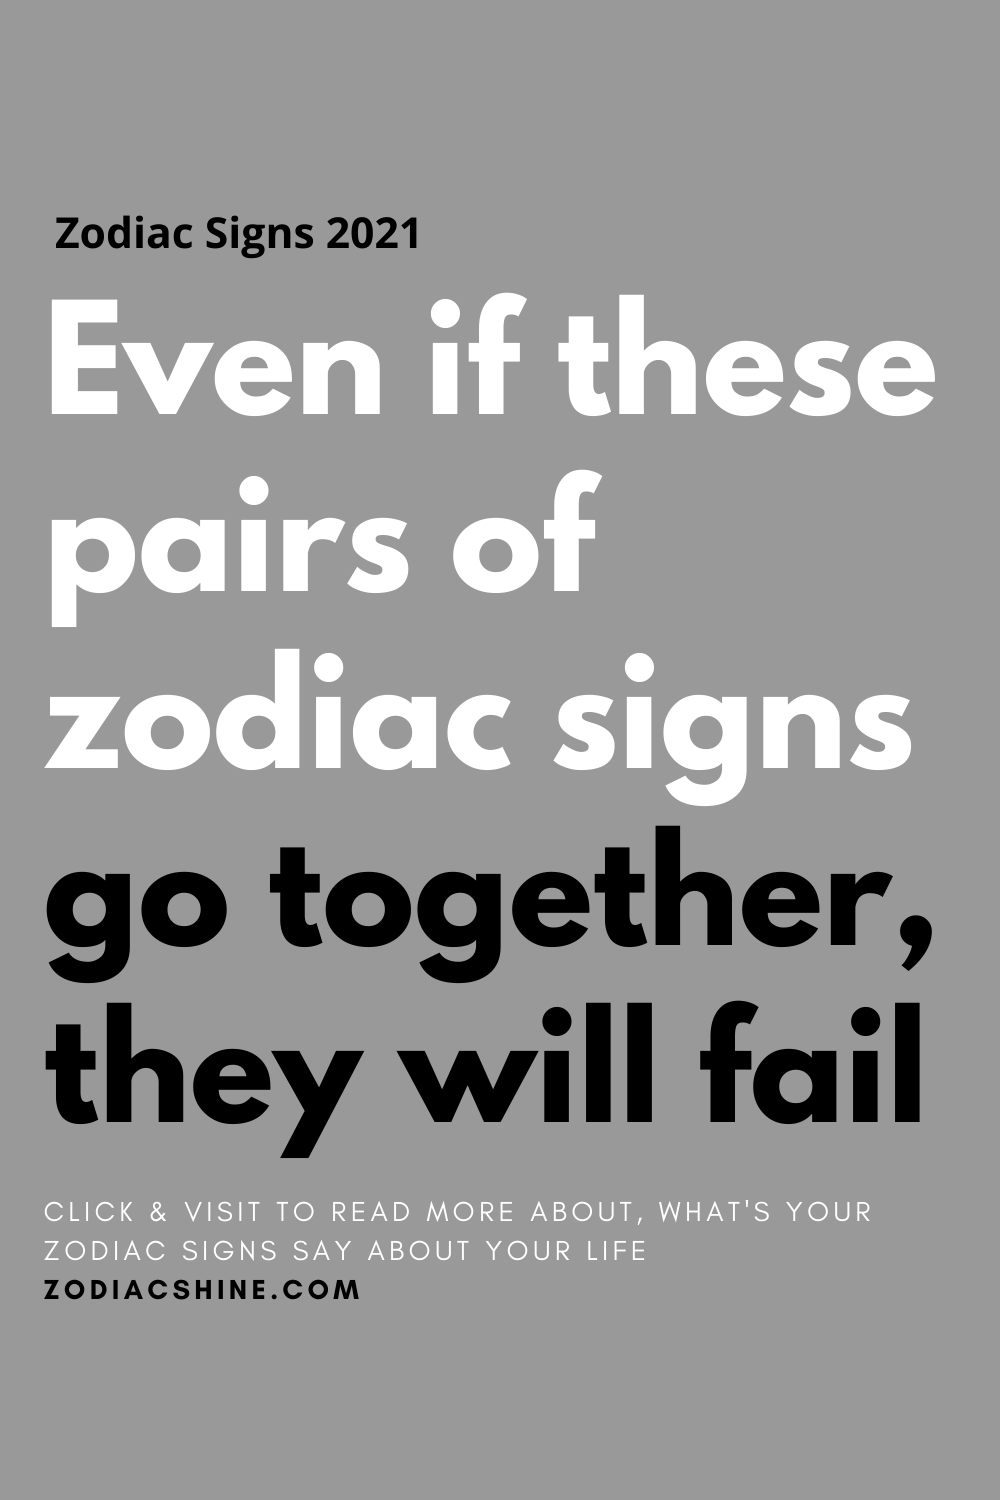 Even if these pairs of zodiac signs go together, they will fail